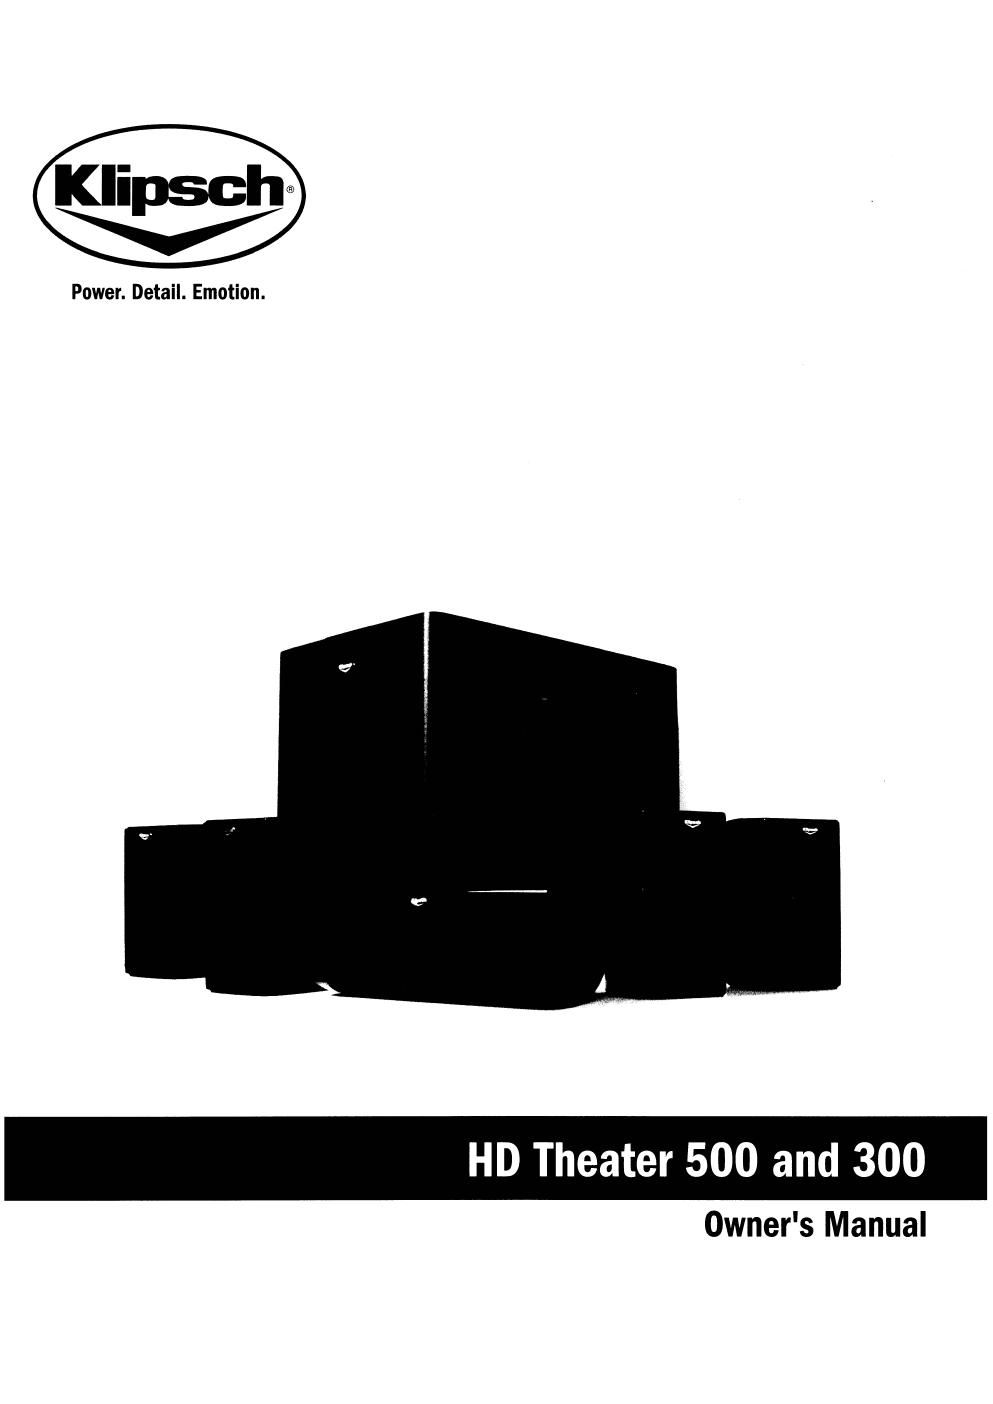 Klipsch Hd Theater 300 Owners Manual